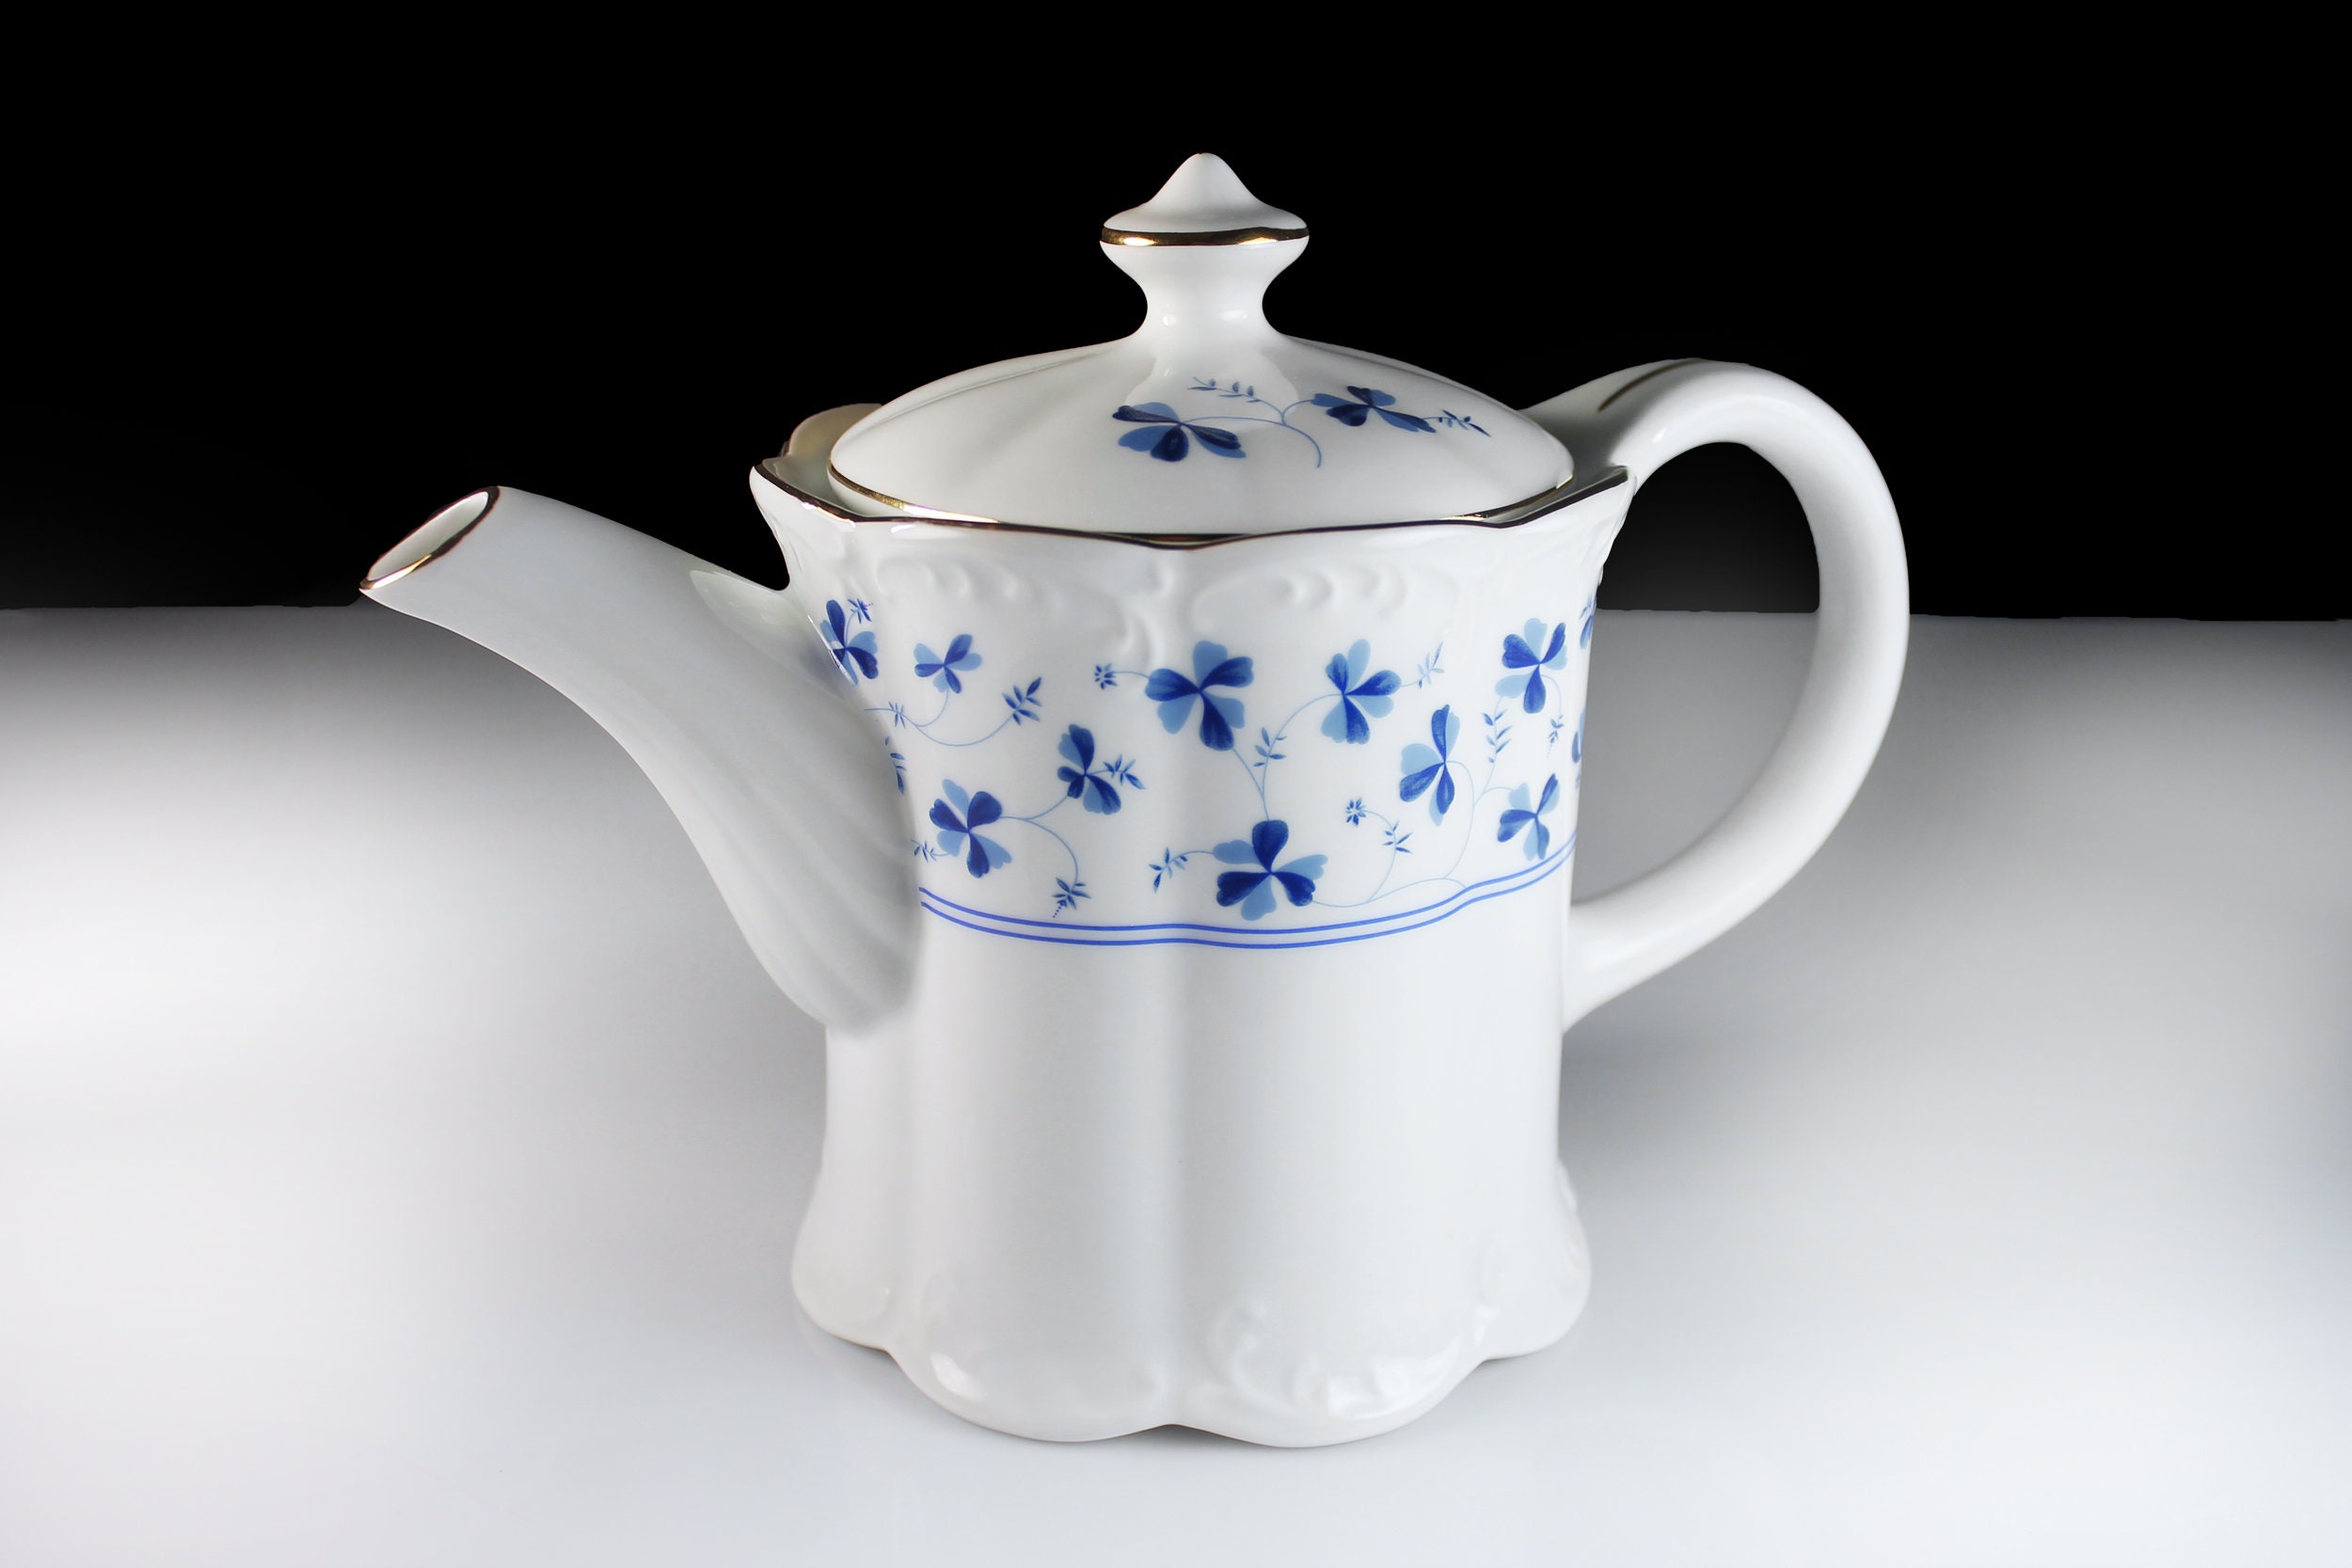 Blue & White Chinese Teapot/ Cute Personal Size Liling China Tea Pot With  Reseased Lid/ Small Pretty Floral Designed Ceramic Teapot 